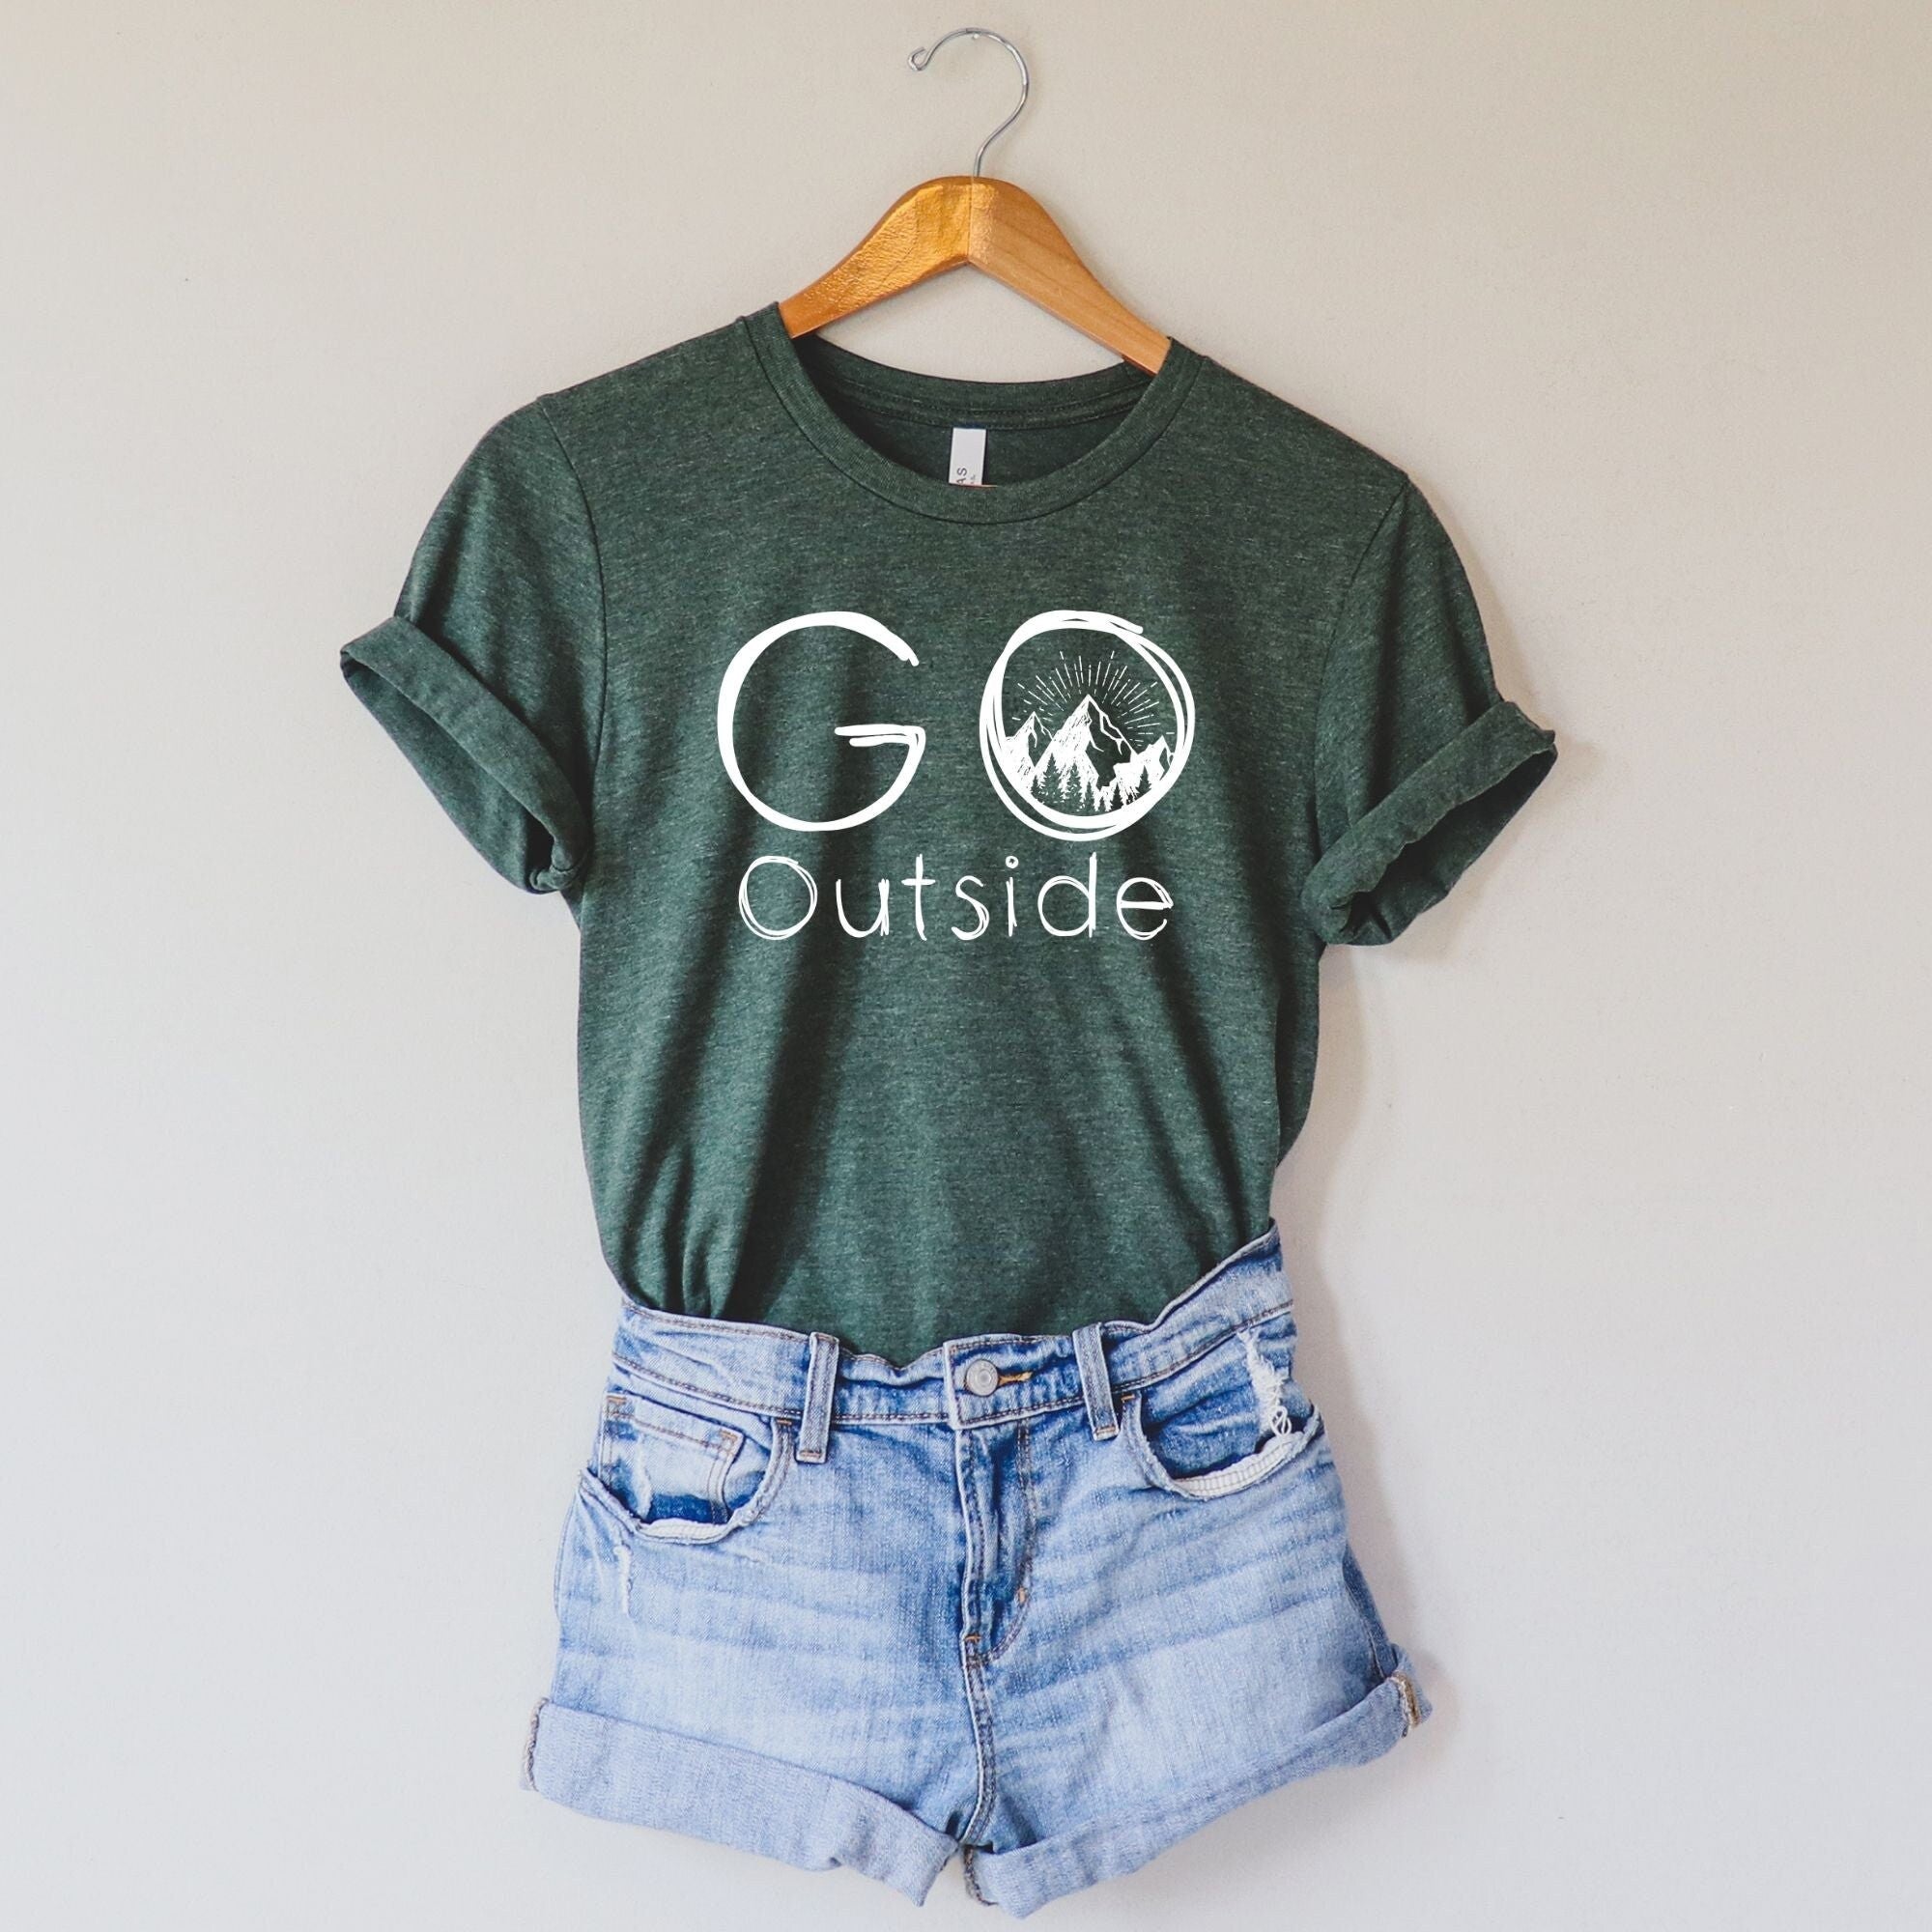 Go Outside Graphic Tee for Hiker *UNISEX FIT*-208 Tees Wholesale, Idaho